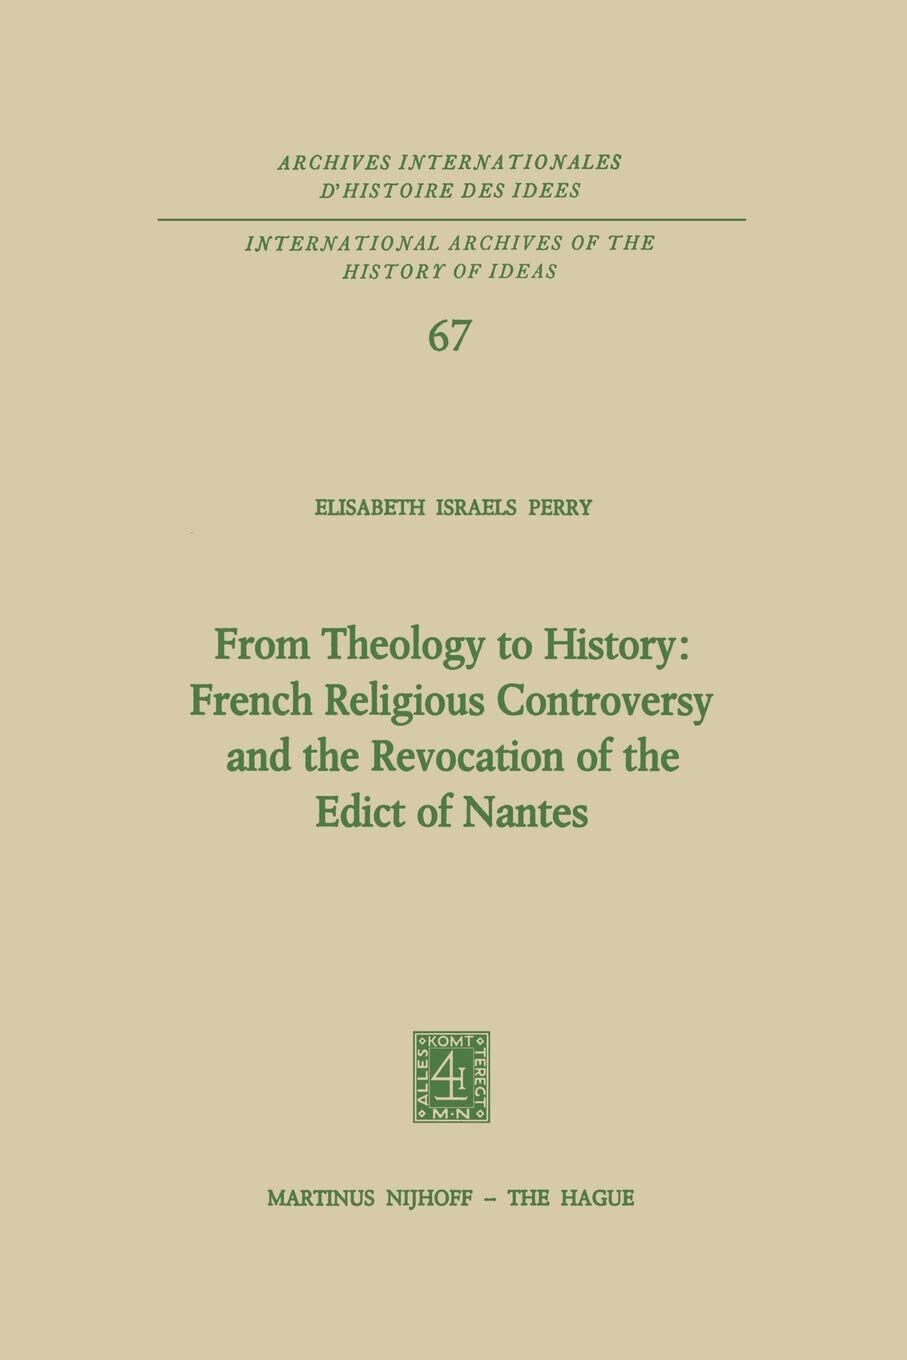 From Theology to History - Elisabeth Israels Perry - Springer, 2013